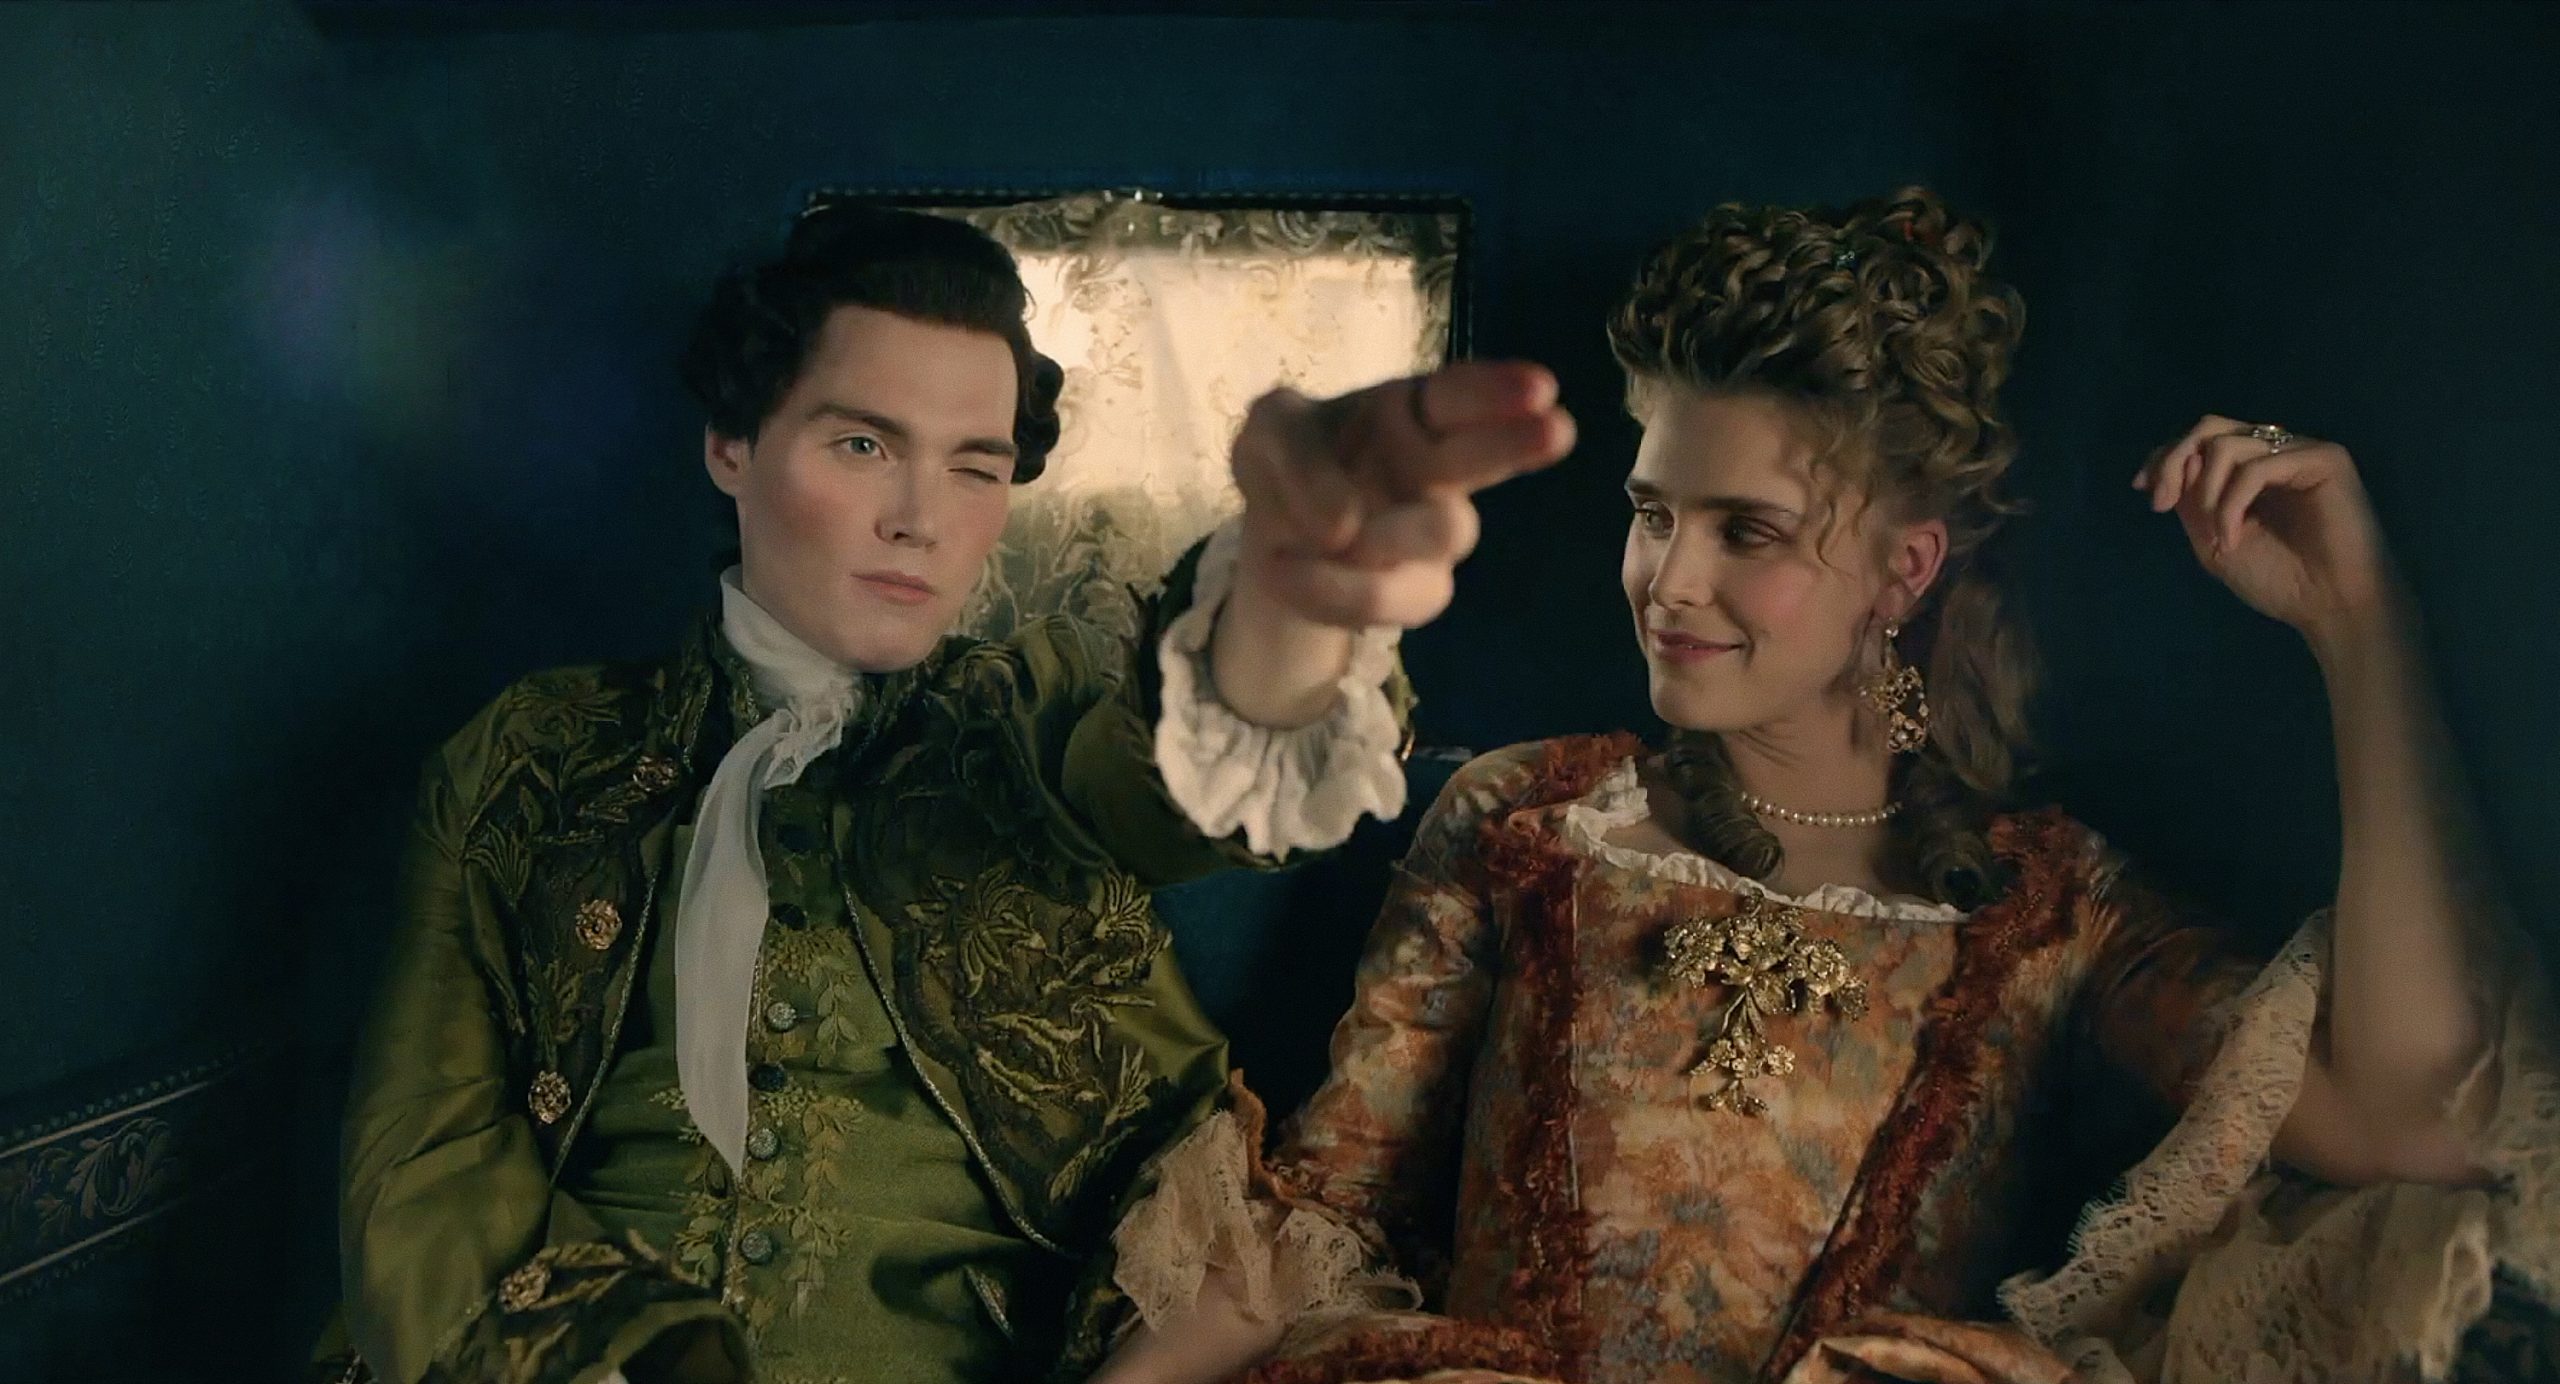 Marie Antoinette Episodes 7 and 8 Release Date